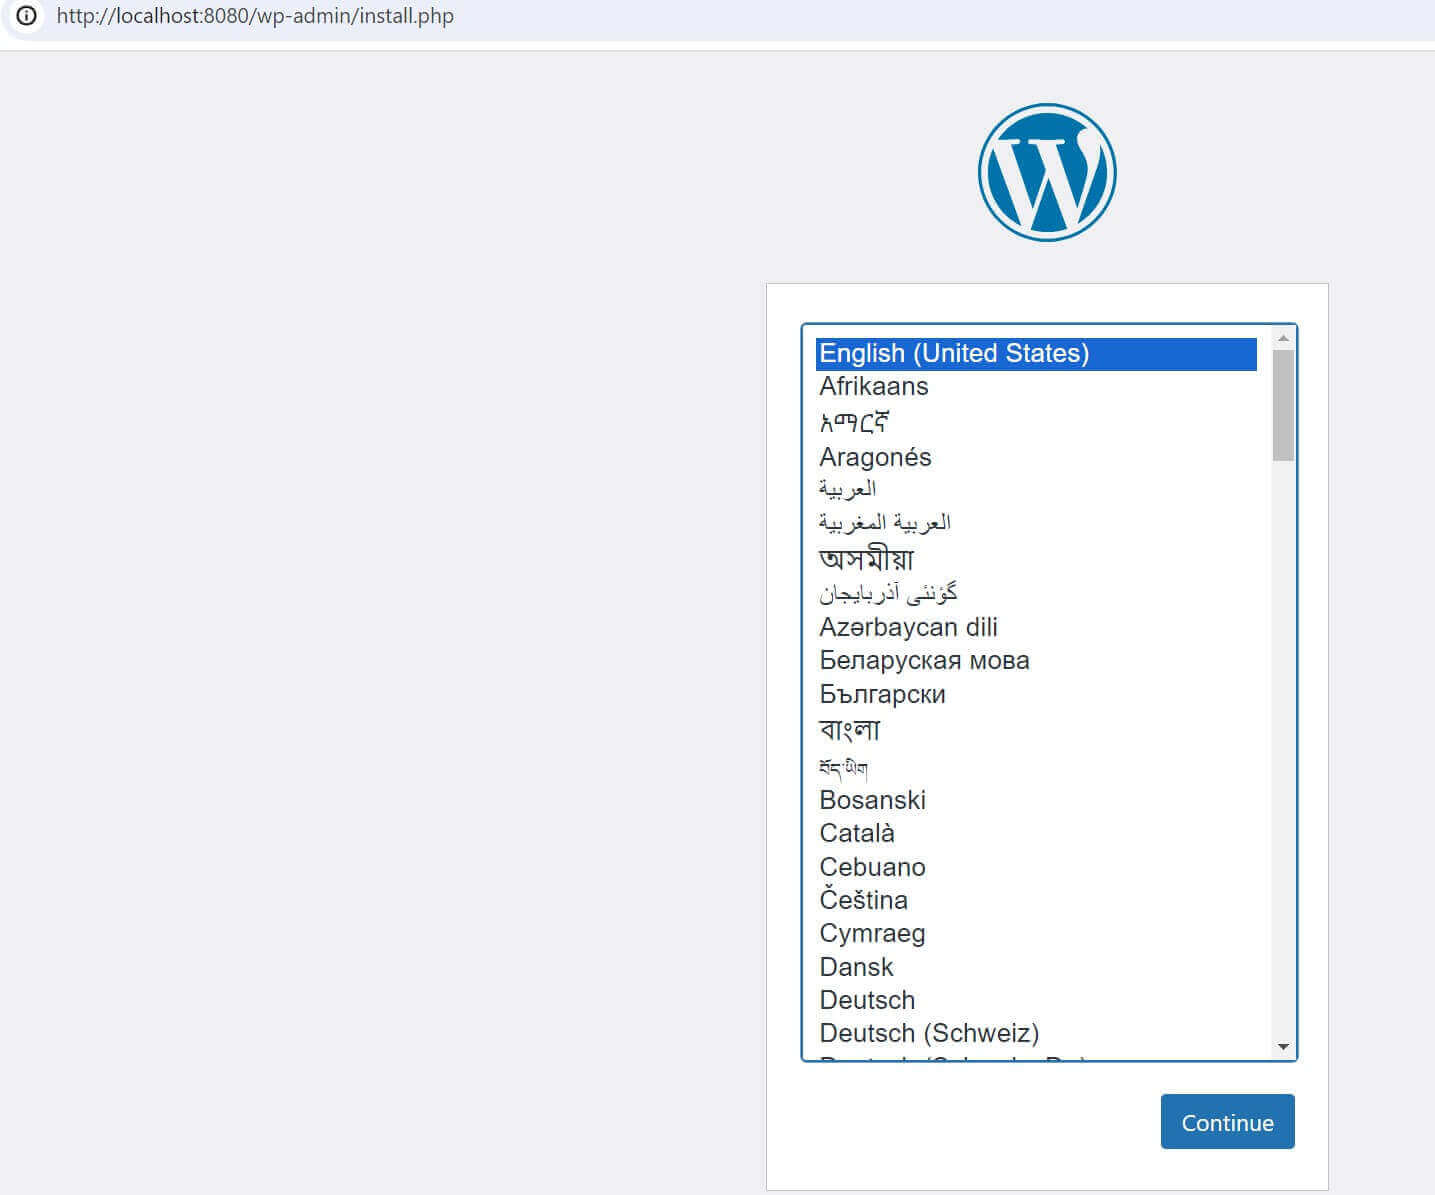 Accessing WordPress on Portainer